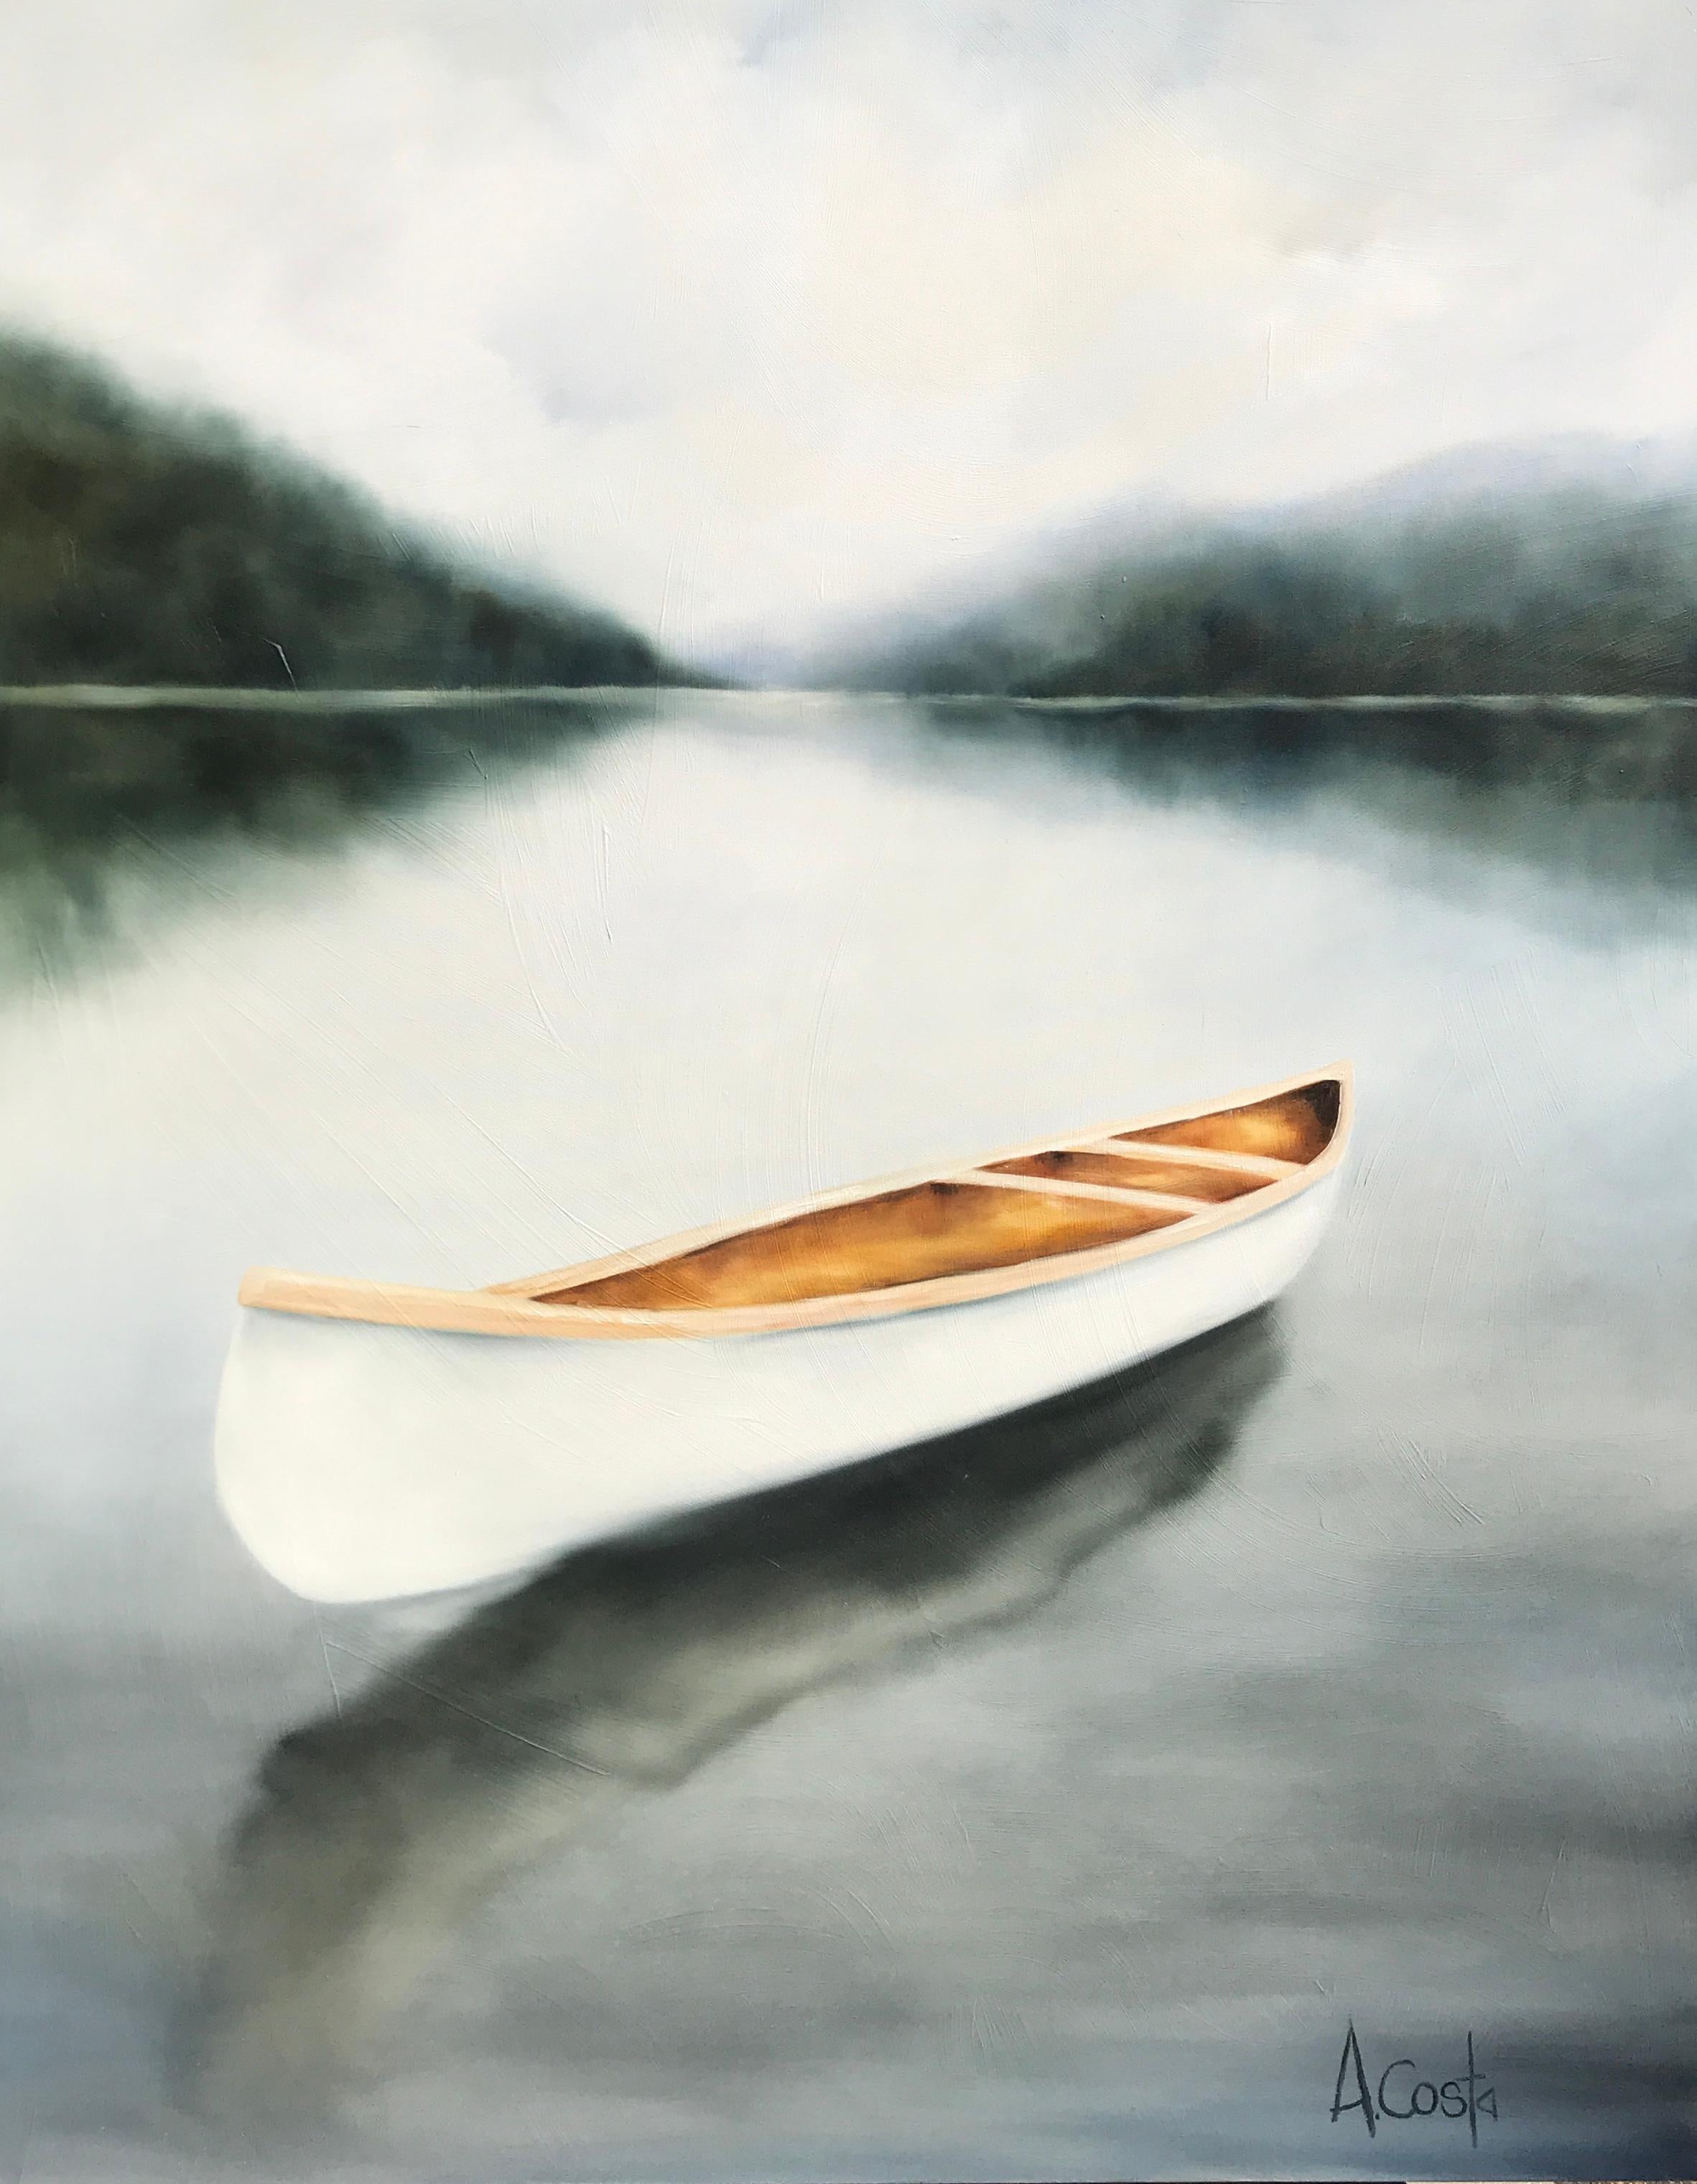 Andrea Costa's rural roots and endless love affair with the land and water are the source of inspiration for her luminous and masterful landscape paintings.

Costa approaches each painting by exploring the underlying narrative and metaphor, and